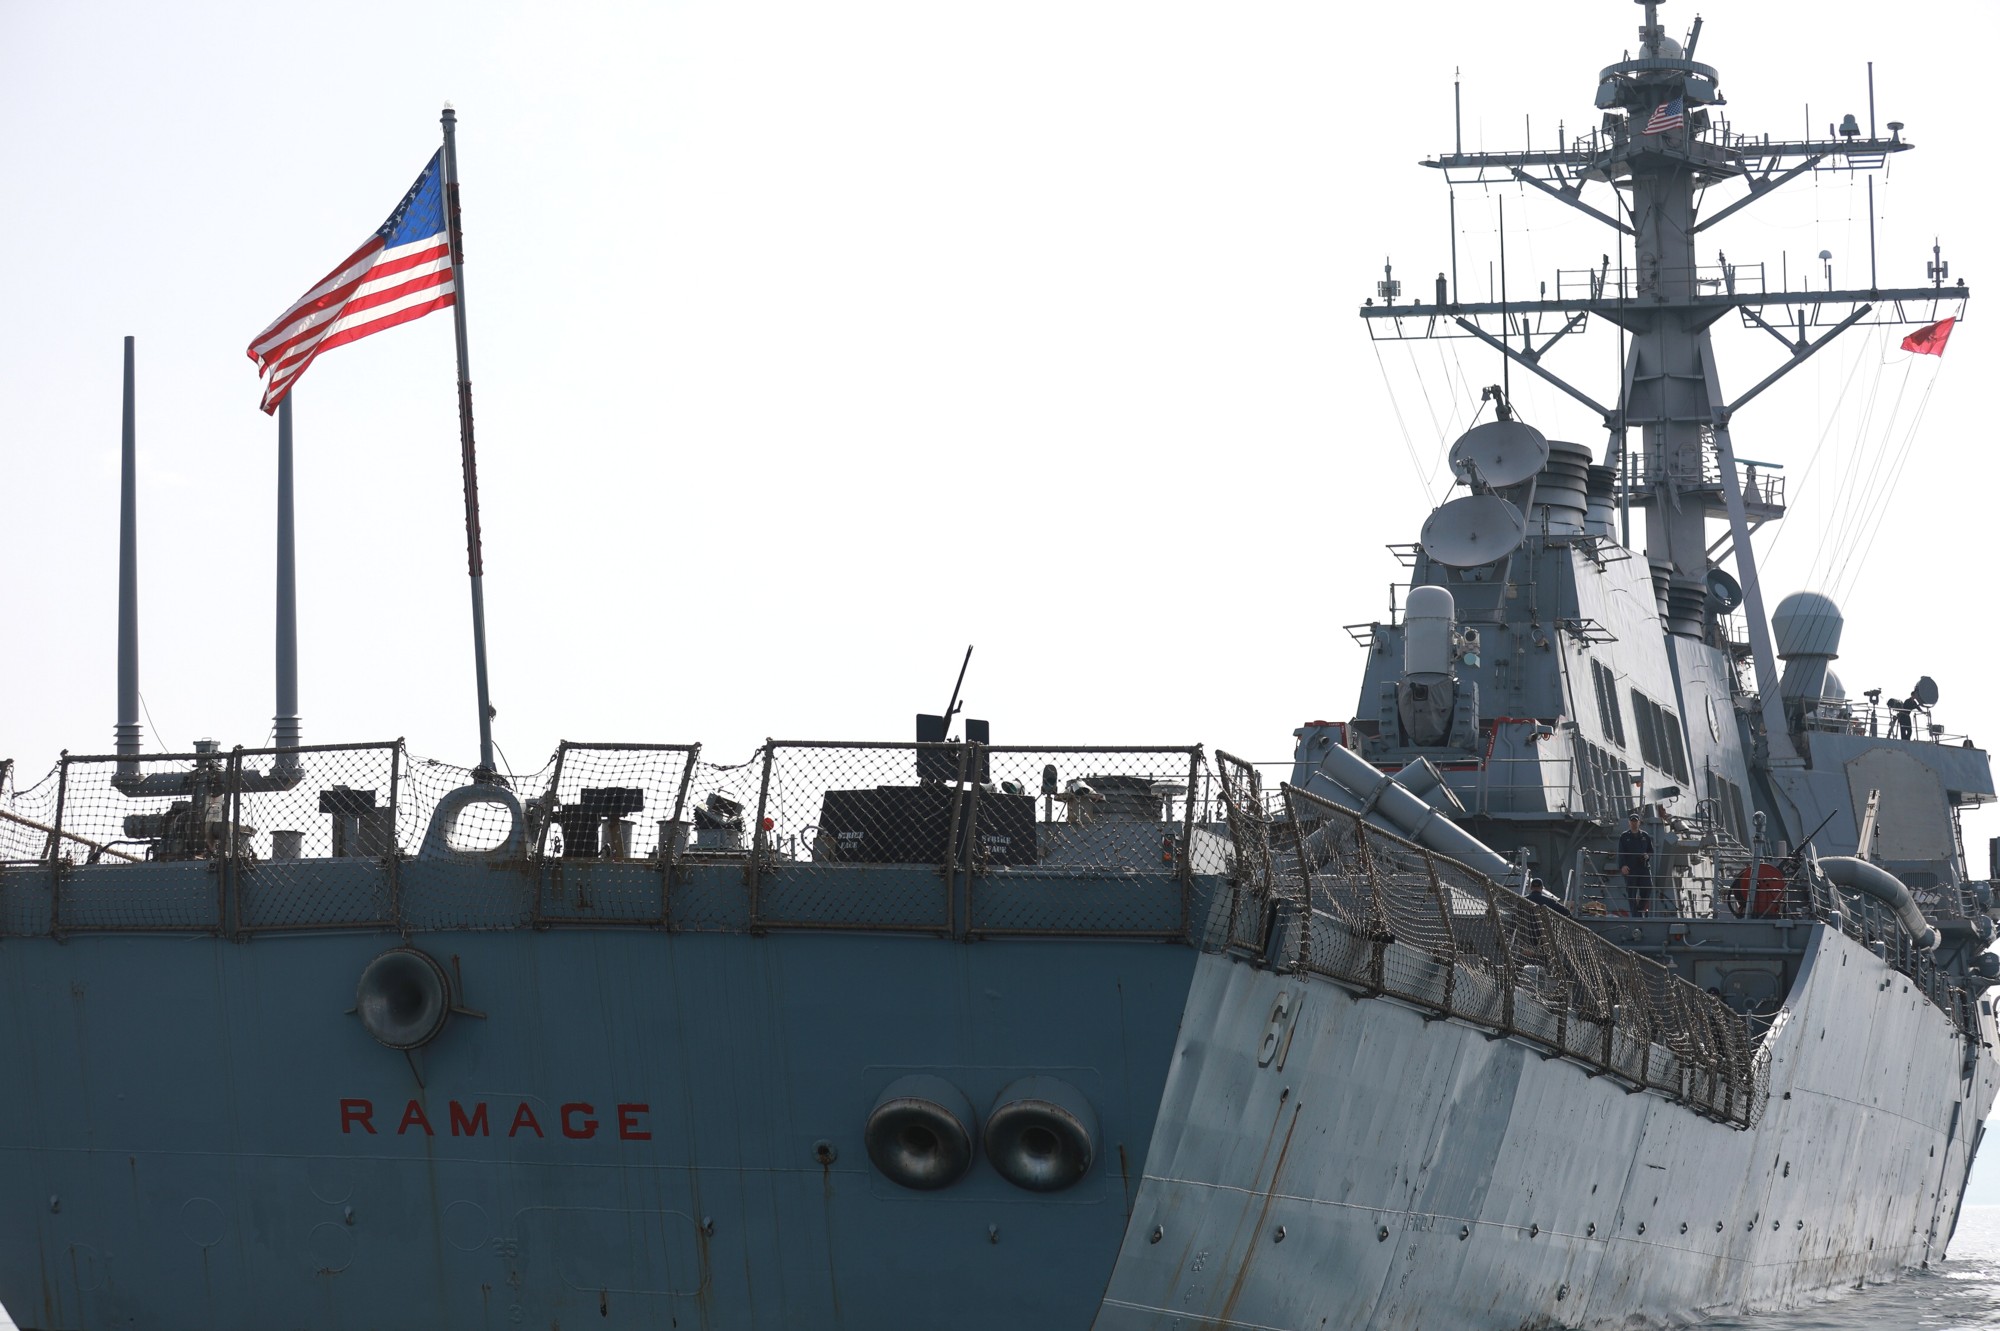 ddg-61 uss ramage guided missile destroyer arleigh burke class aegis us navy durres albania 2023 116